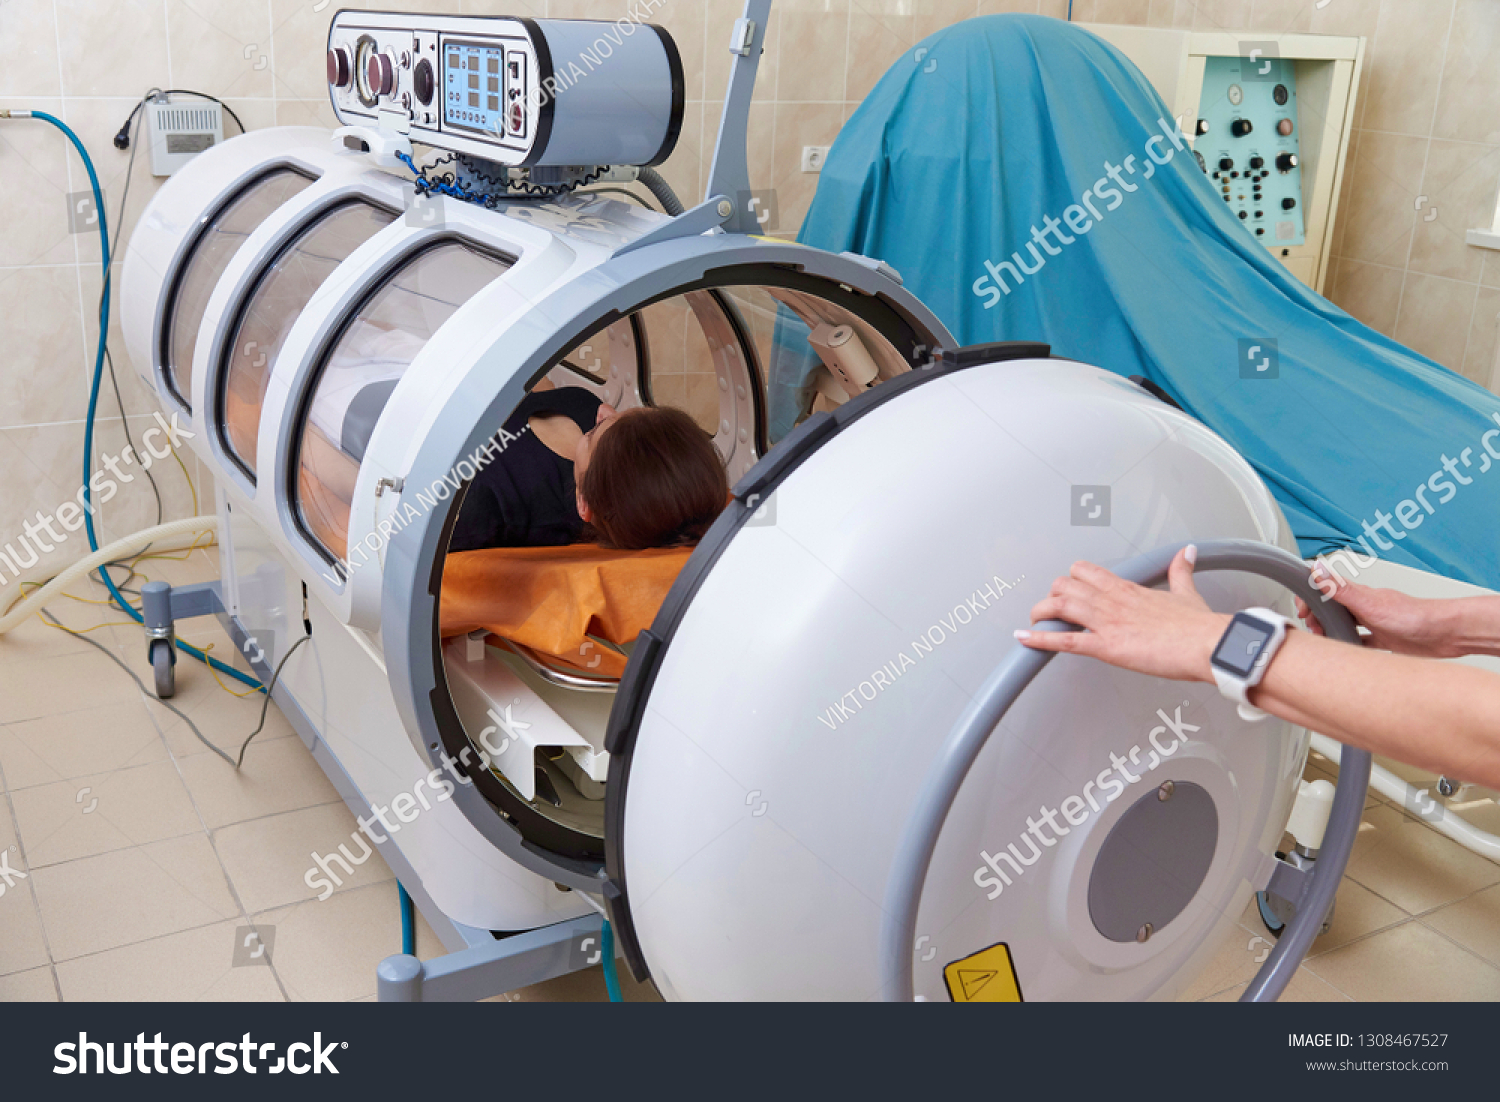 Hyperbaric oxygen chamber in a hospital. #1308467527